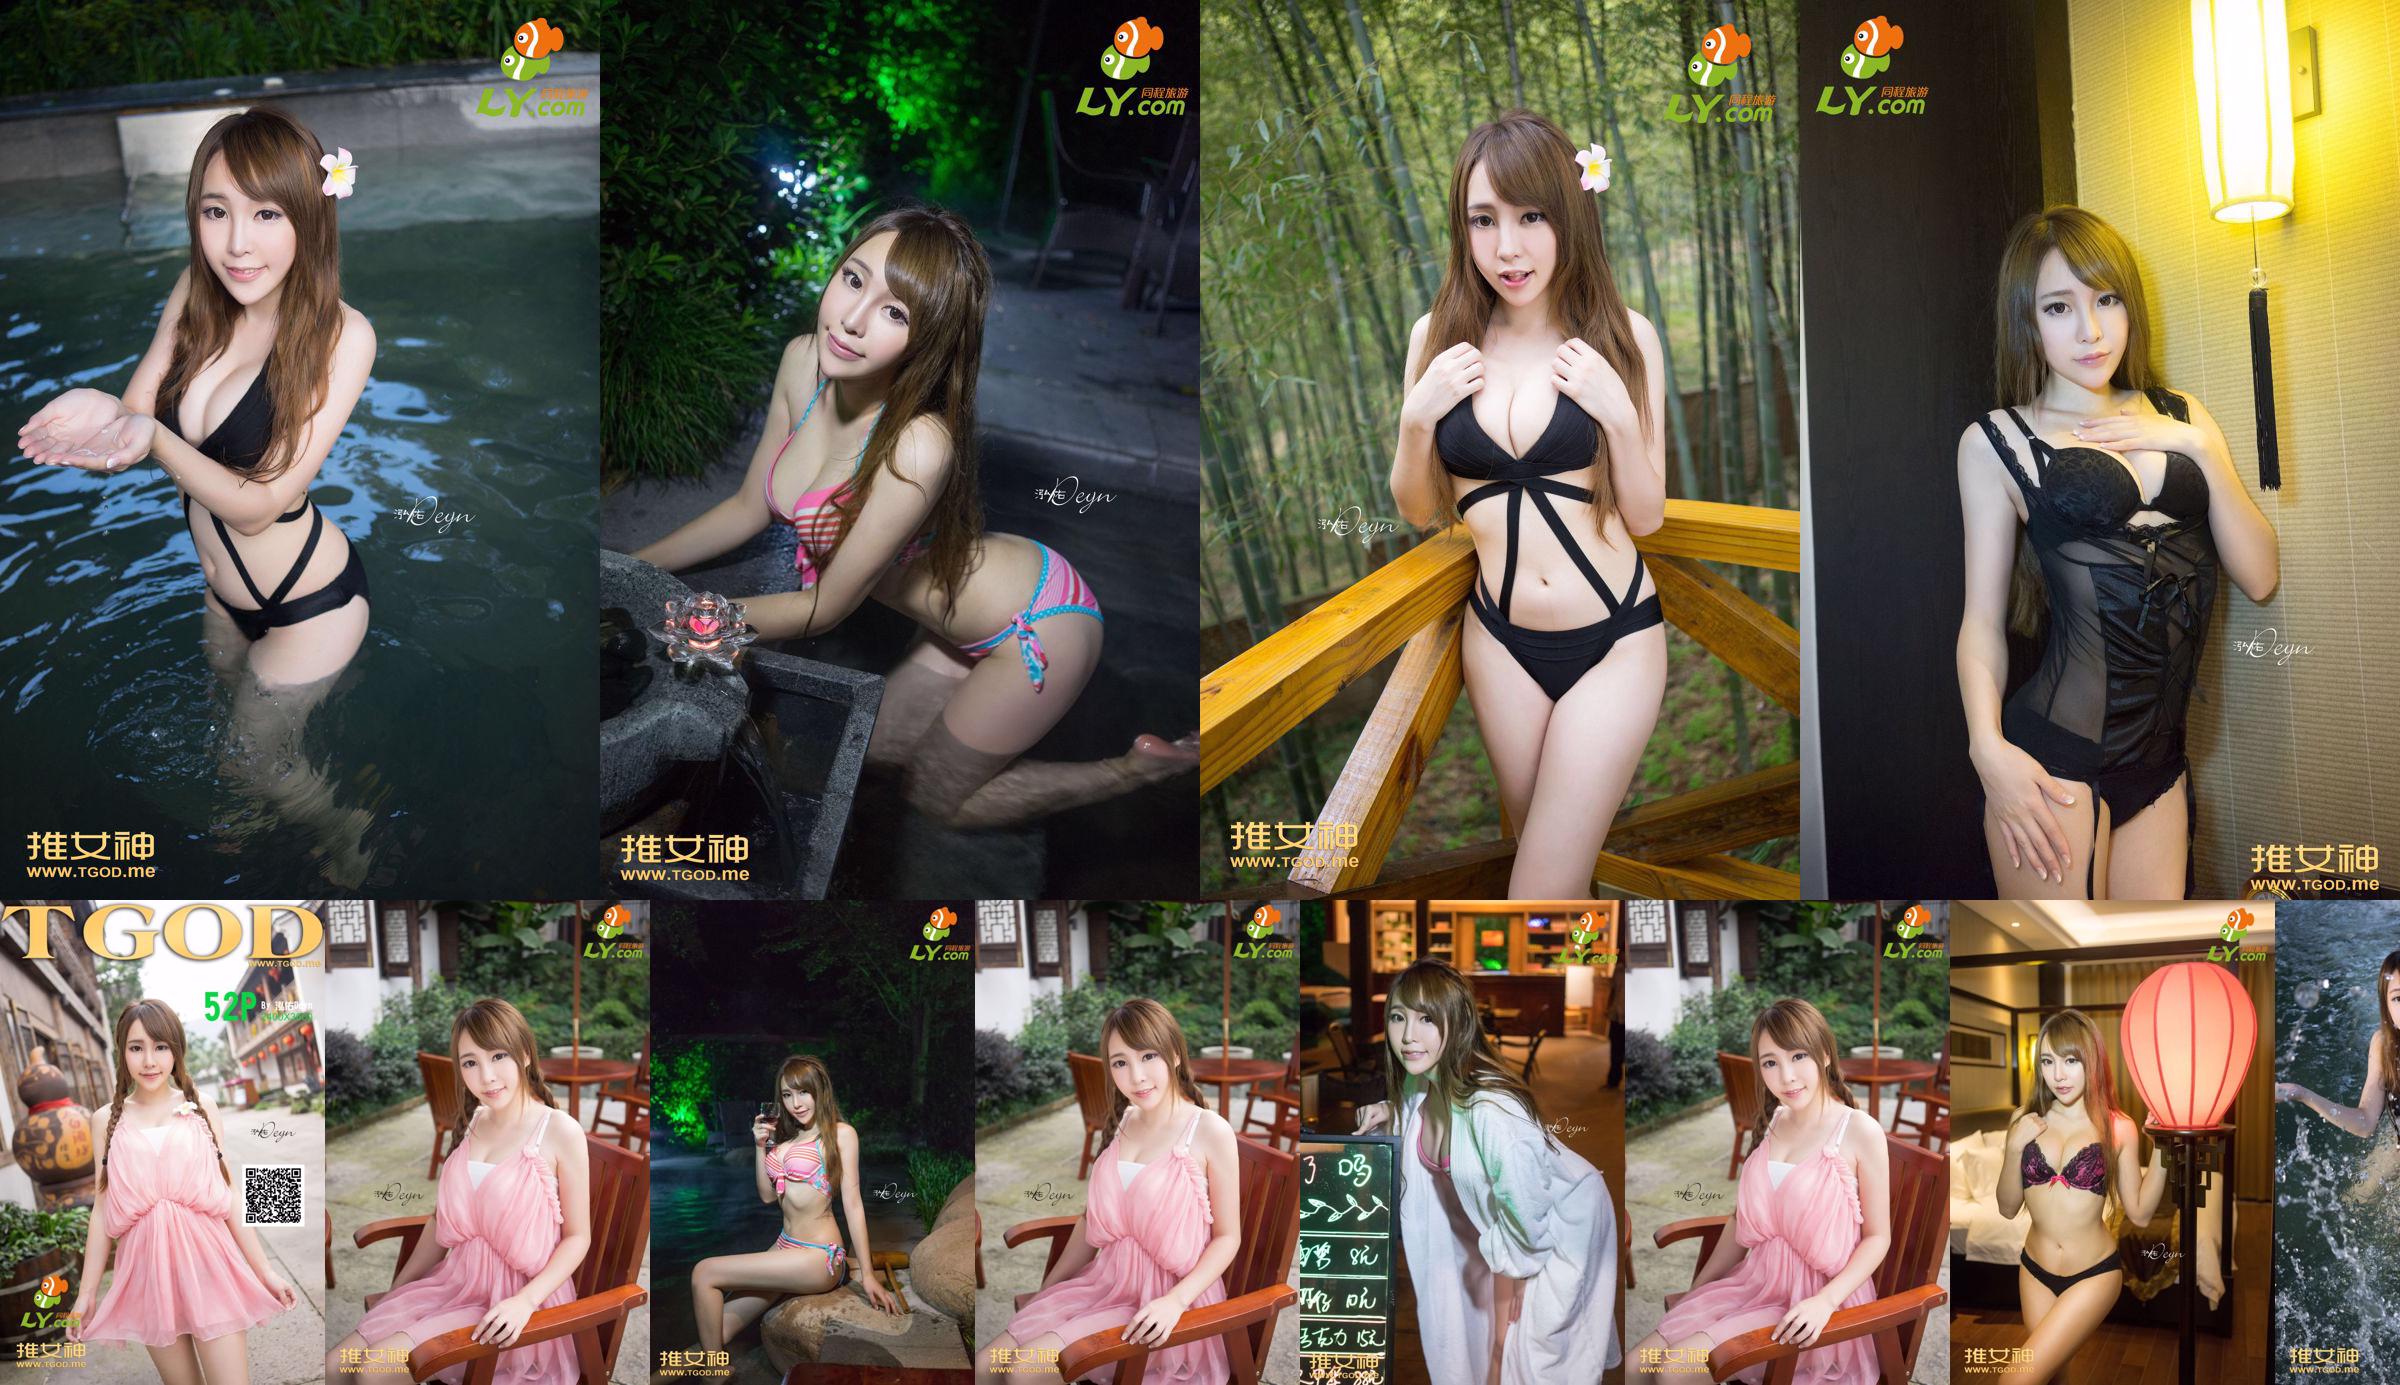 Huang Mengxian "Where Is the Goddess Going Issue 7" [TGOD Push Goddess] No.00ff9a Pagina 1